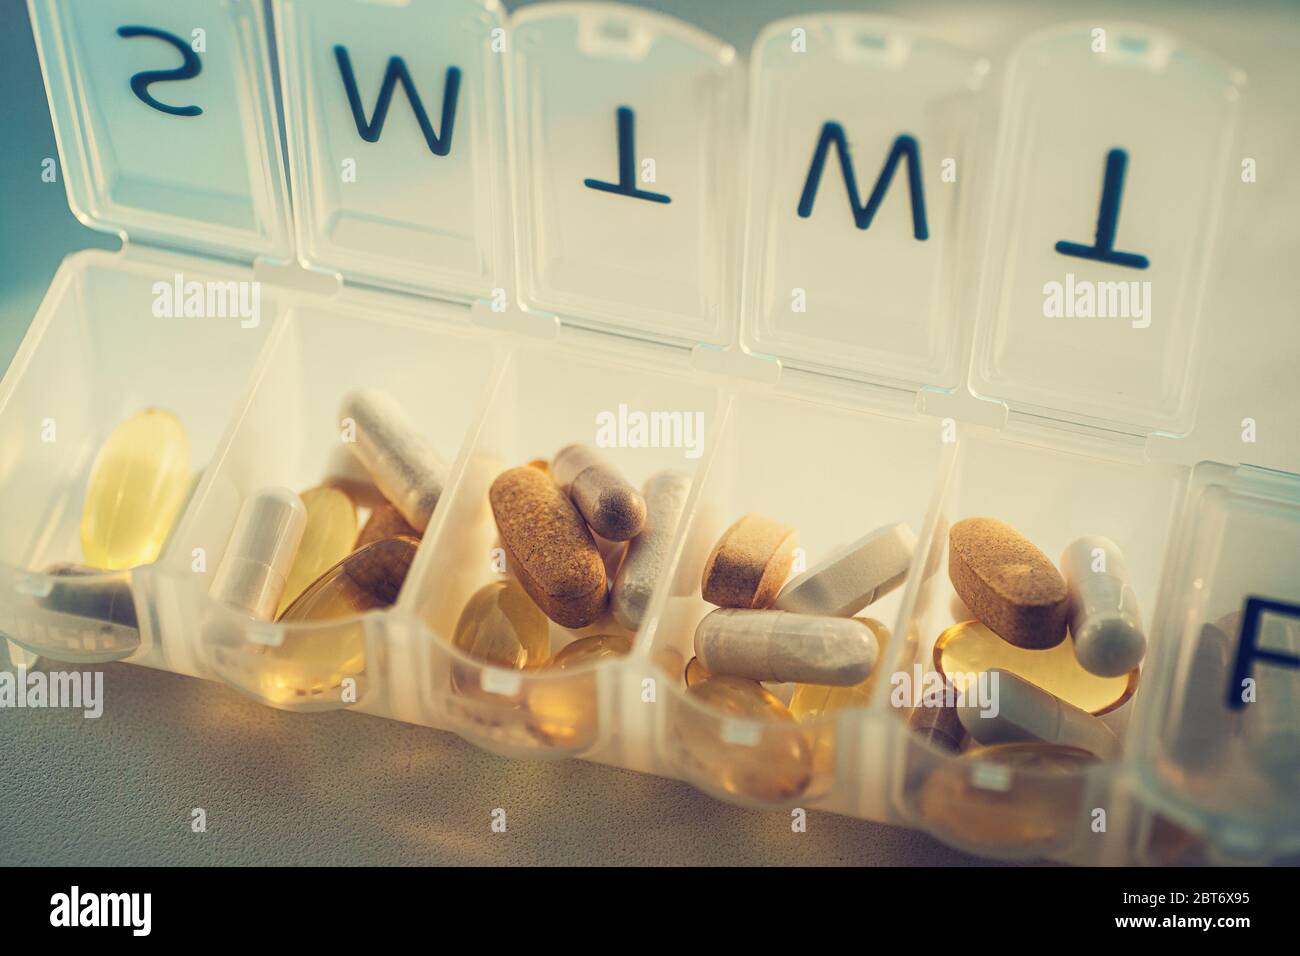 https://c8.alamy.com/comp/2BT6X95/daily-pill-organizer-with-drugs-tablets-and-dietary-supplements-pill-box-with-medication-close-up-2BT6X95.jpg